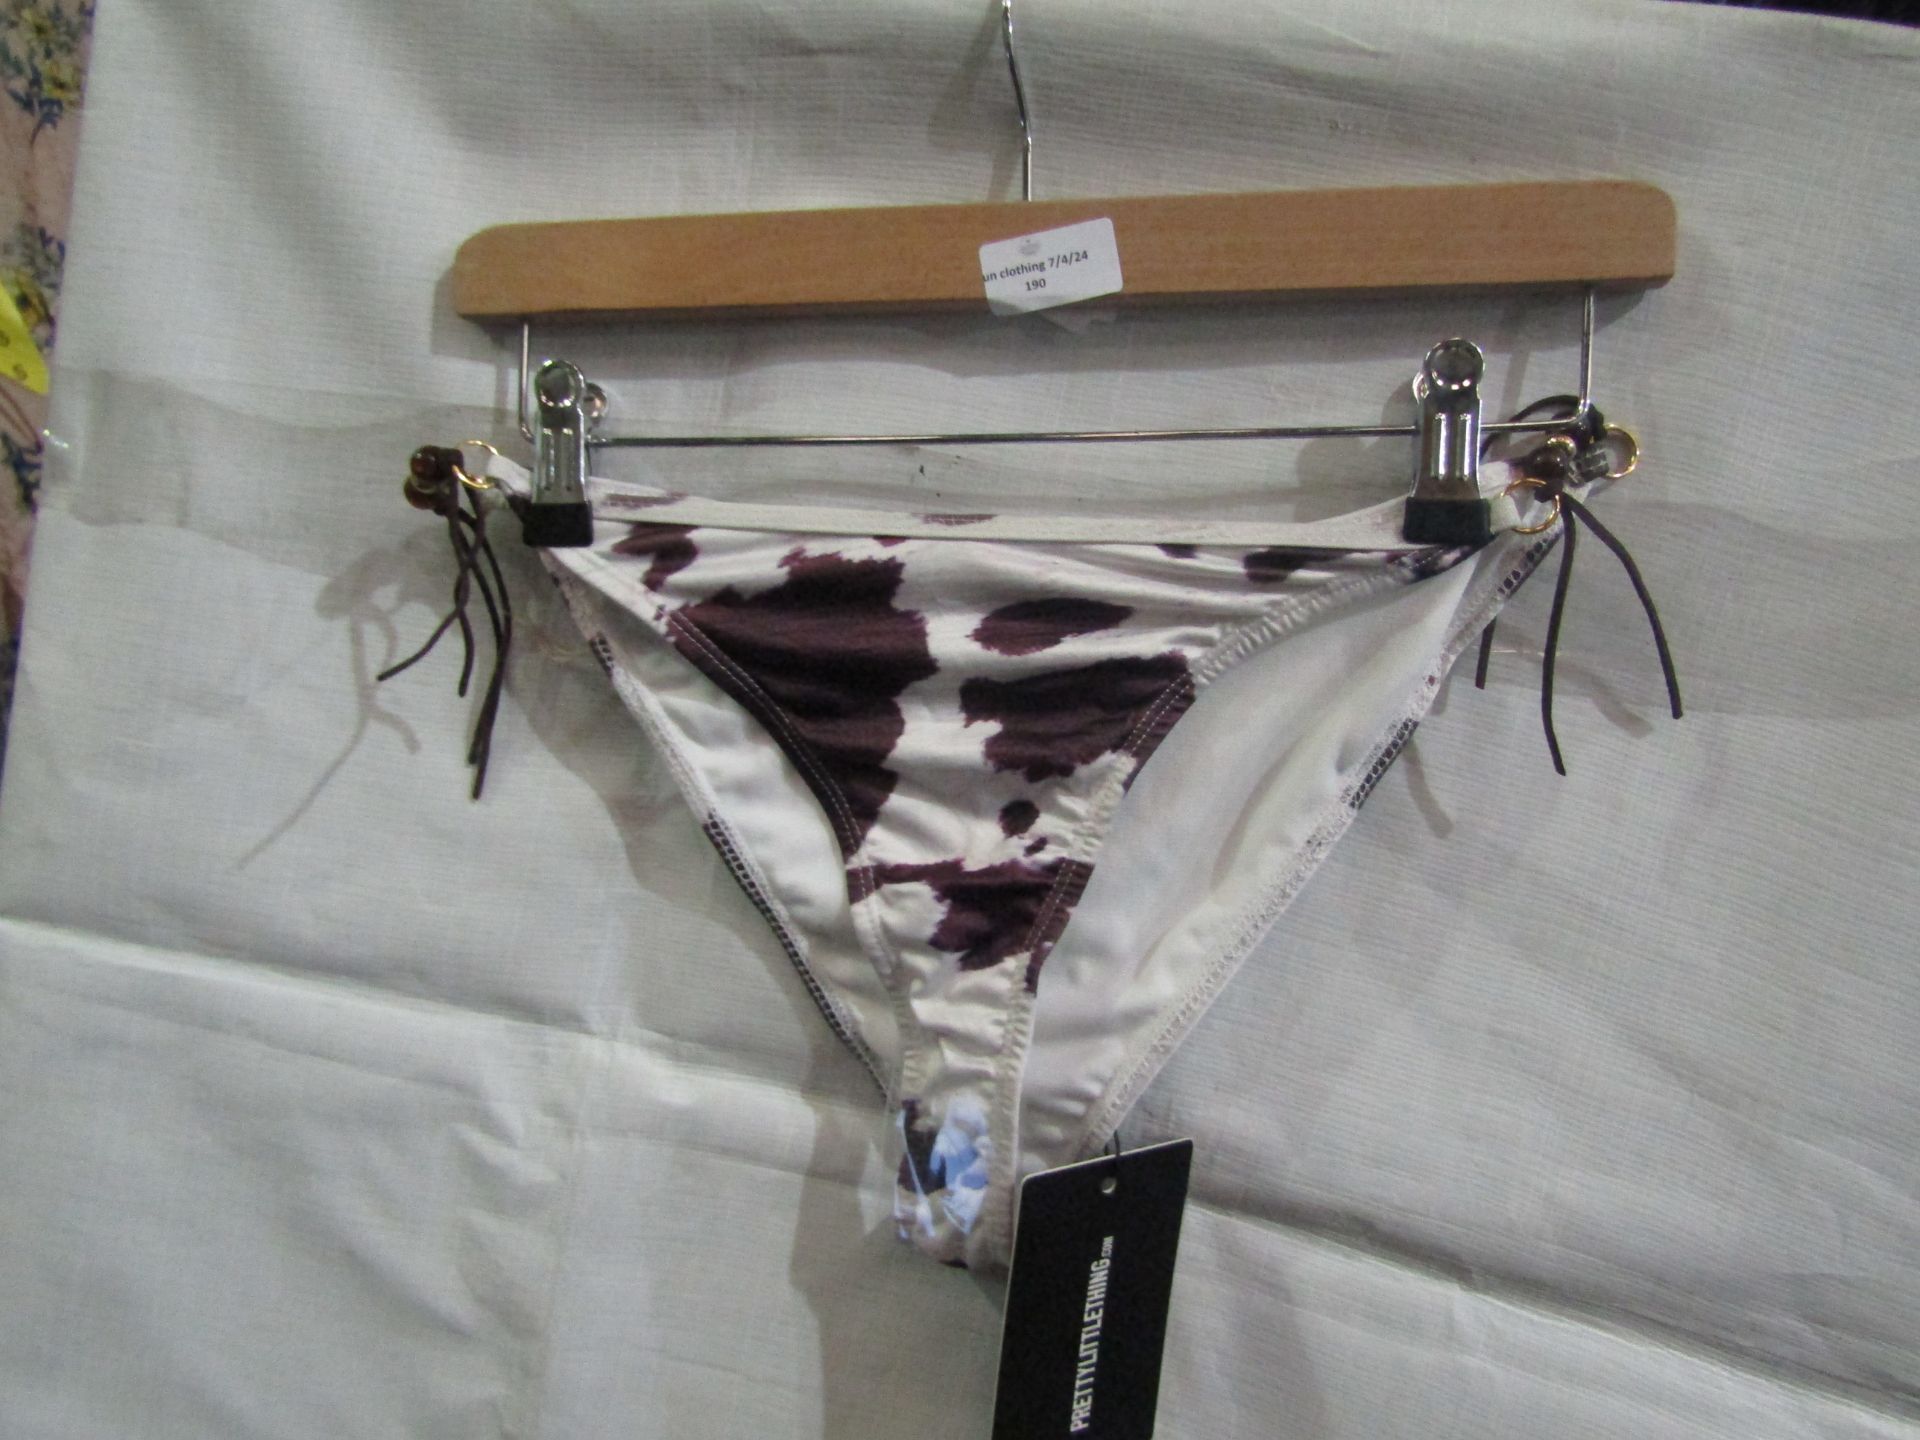 5x Pretty Little Thing Brown Cow Print Beaded Tie Bikini Bottoms - Size 8, New & Packaged.